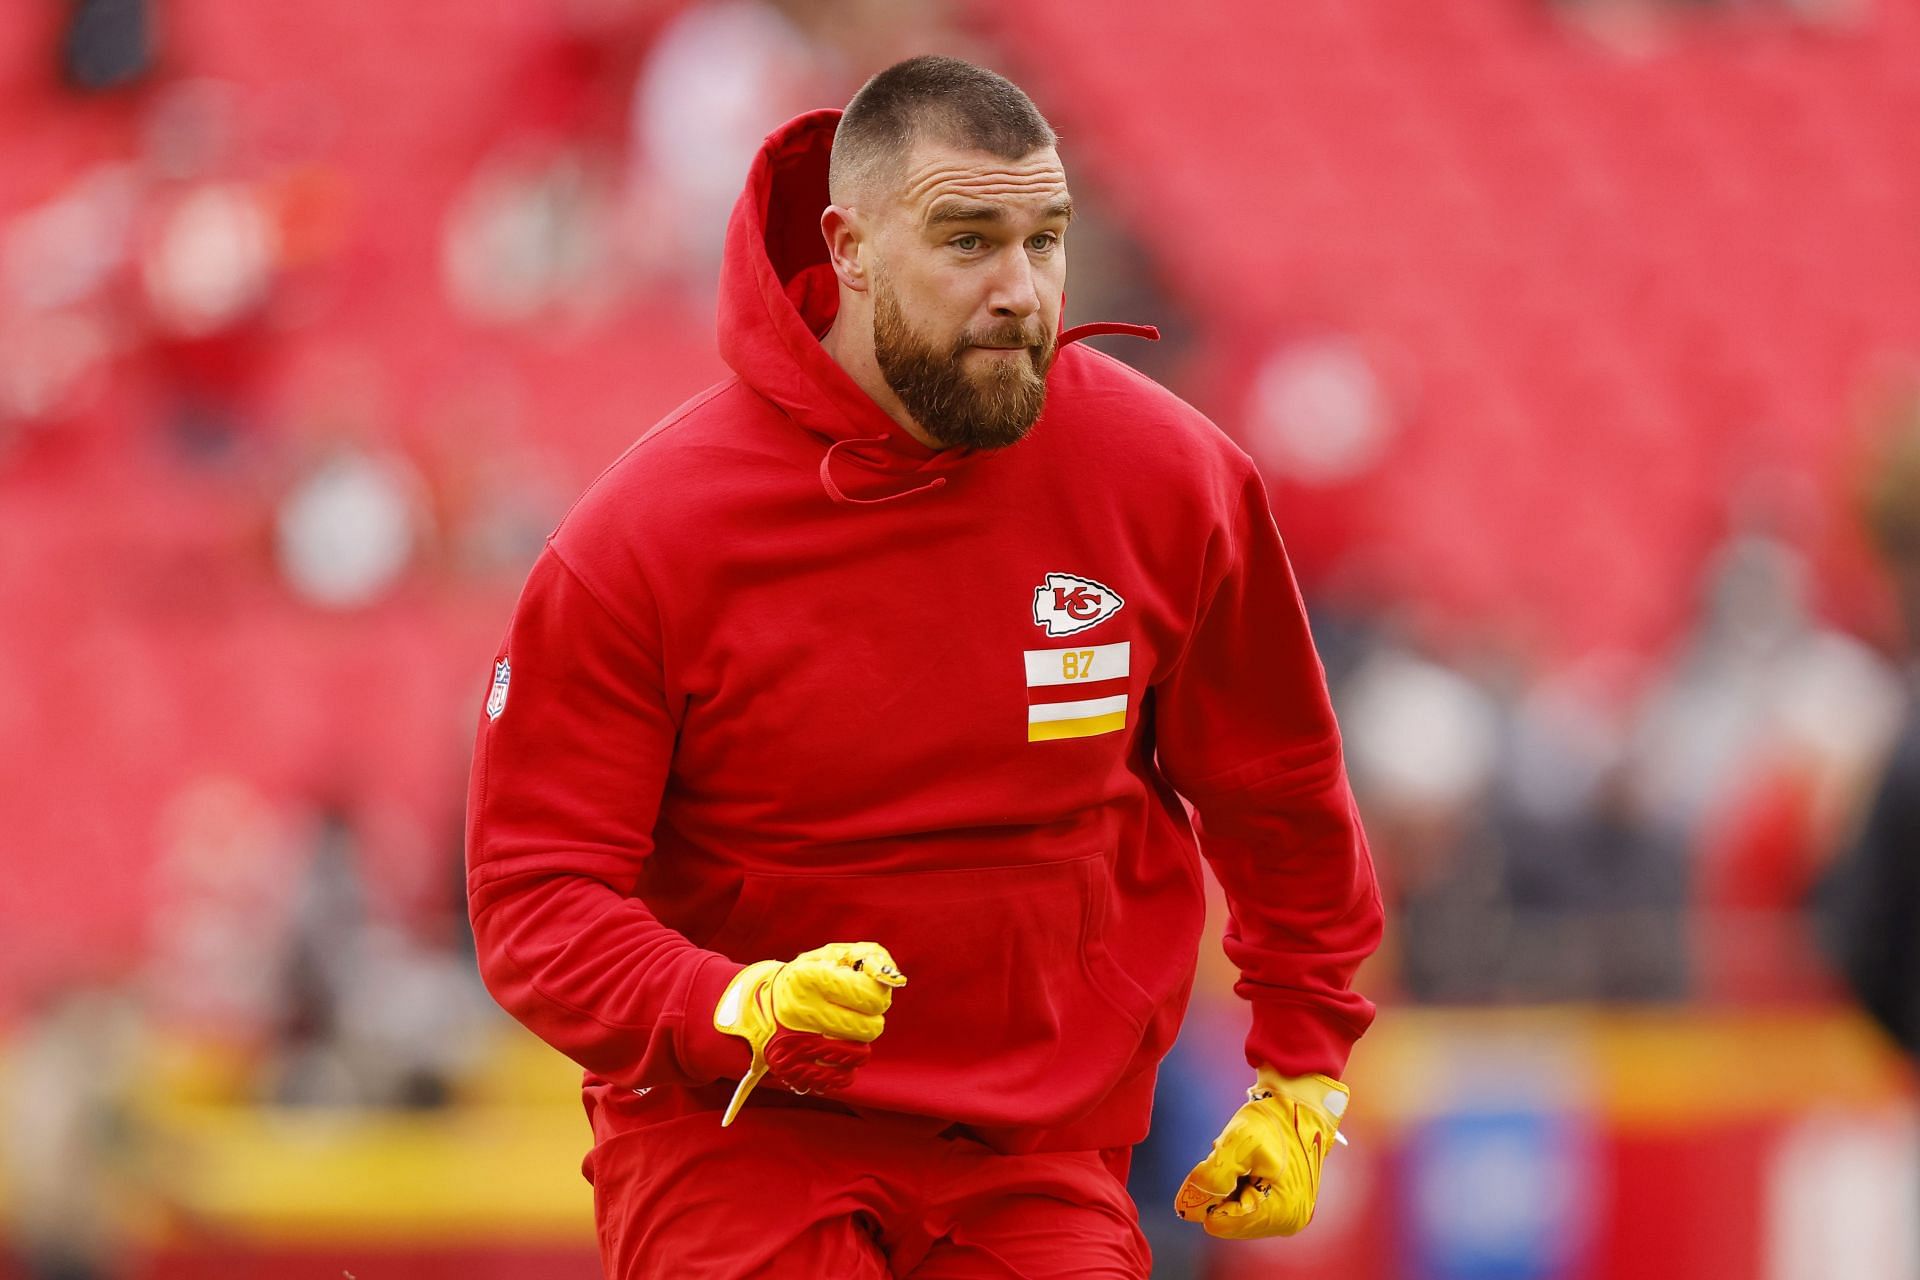 Travis Kelce failed to record 1,000 receiving yards this season